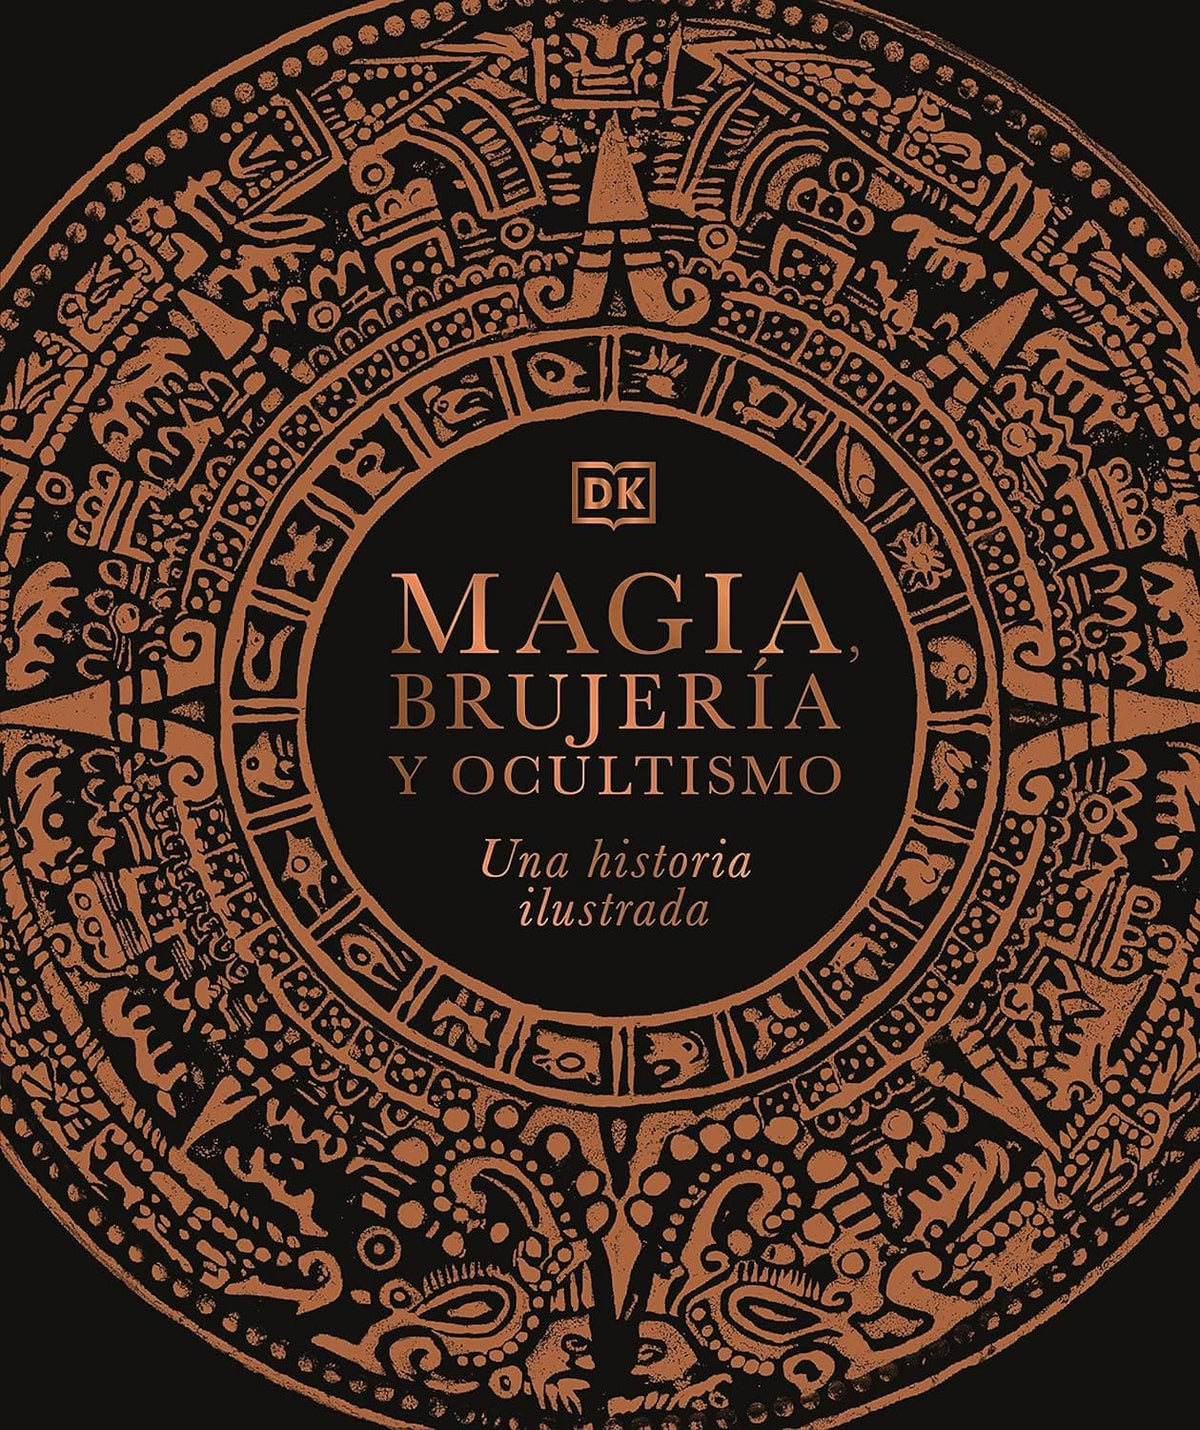 Penguin Random House Magia, brujería y ocultismo (A History of Magic, Witchcraft and the Occult)